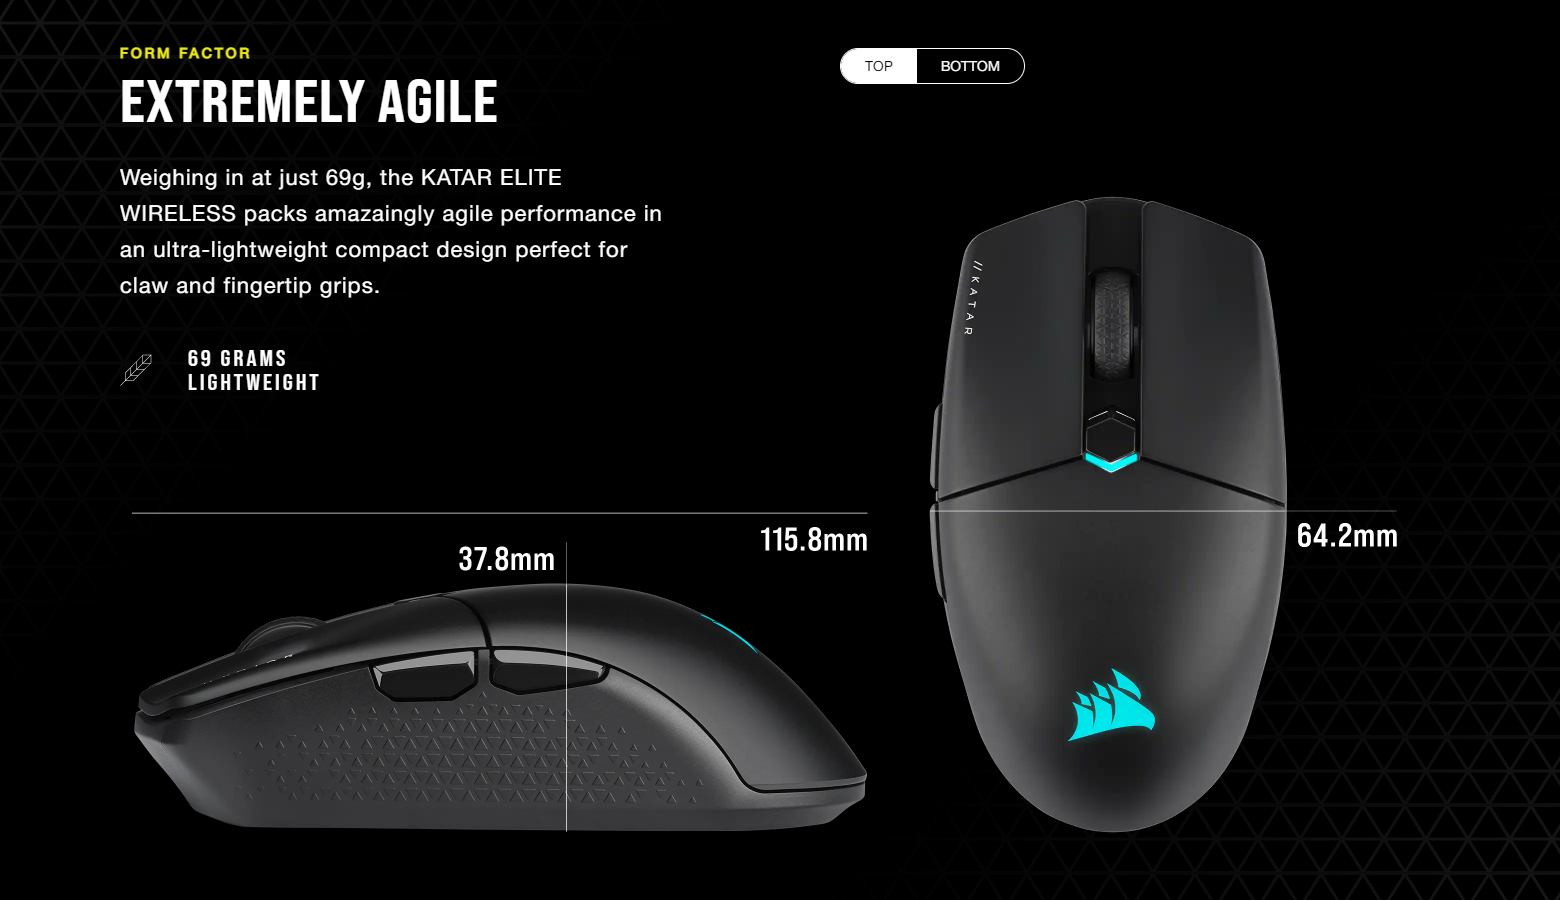 Weighing in at just 69g, the CORSAIR KATAR ELITE WIRELESS gaming mouse ...